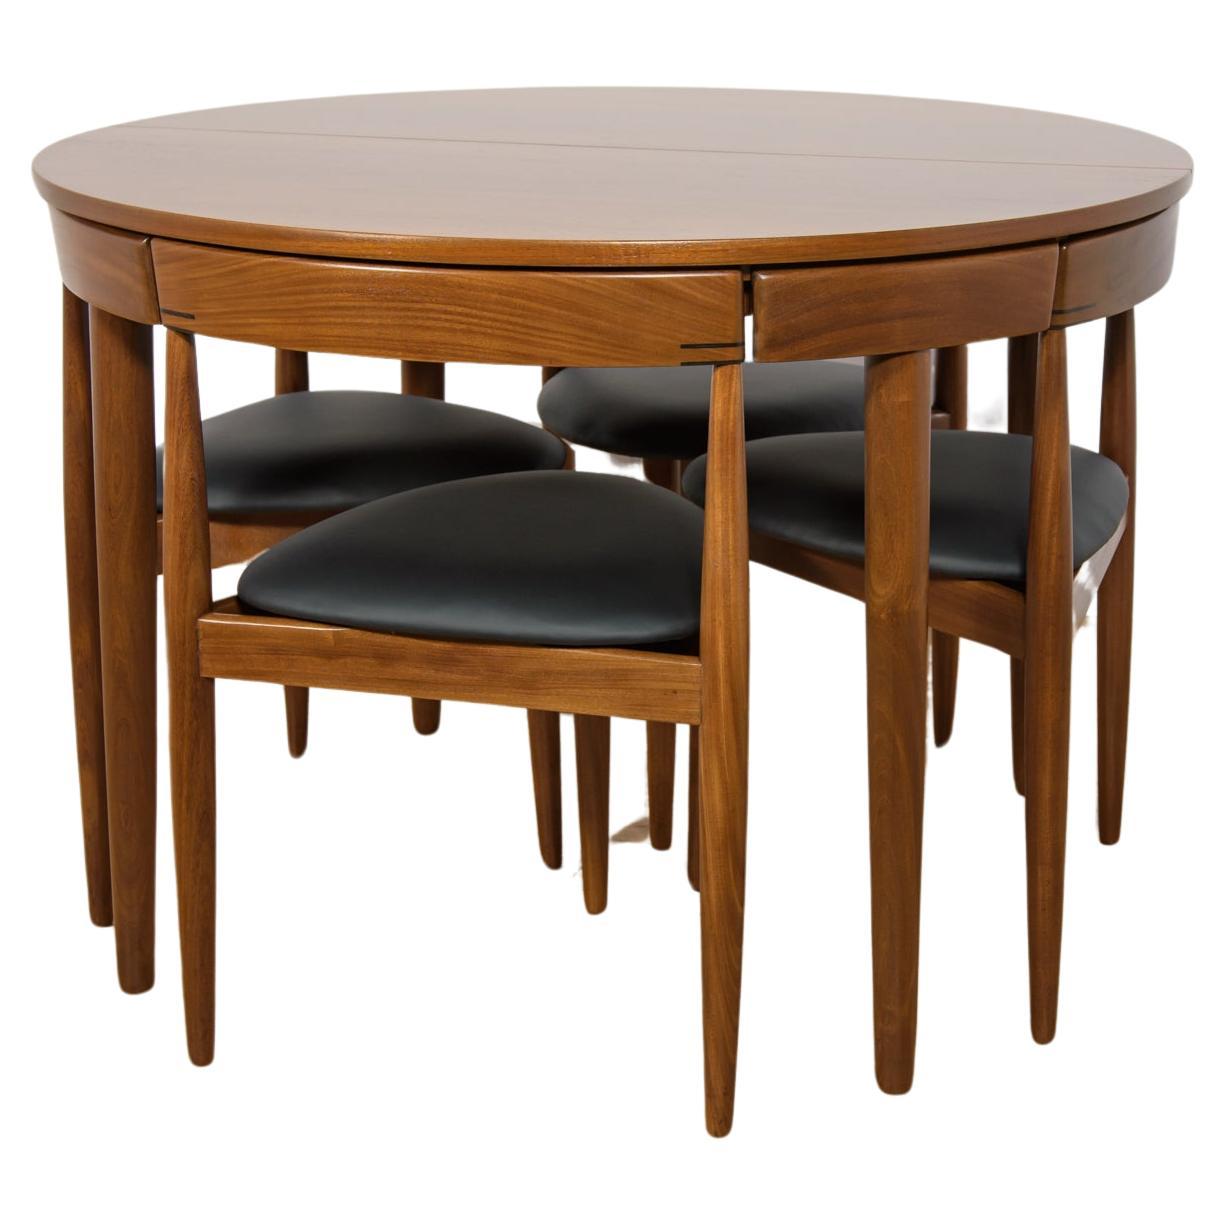  Mid-Century Teak Dining Table and Chairs Set by Hans Olsen for Frem Røjle. For Sale